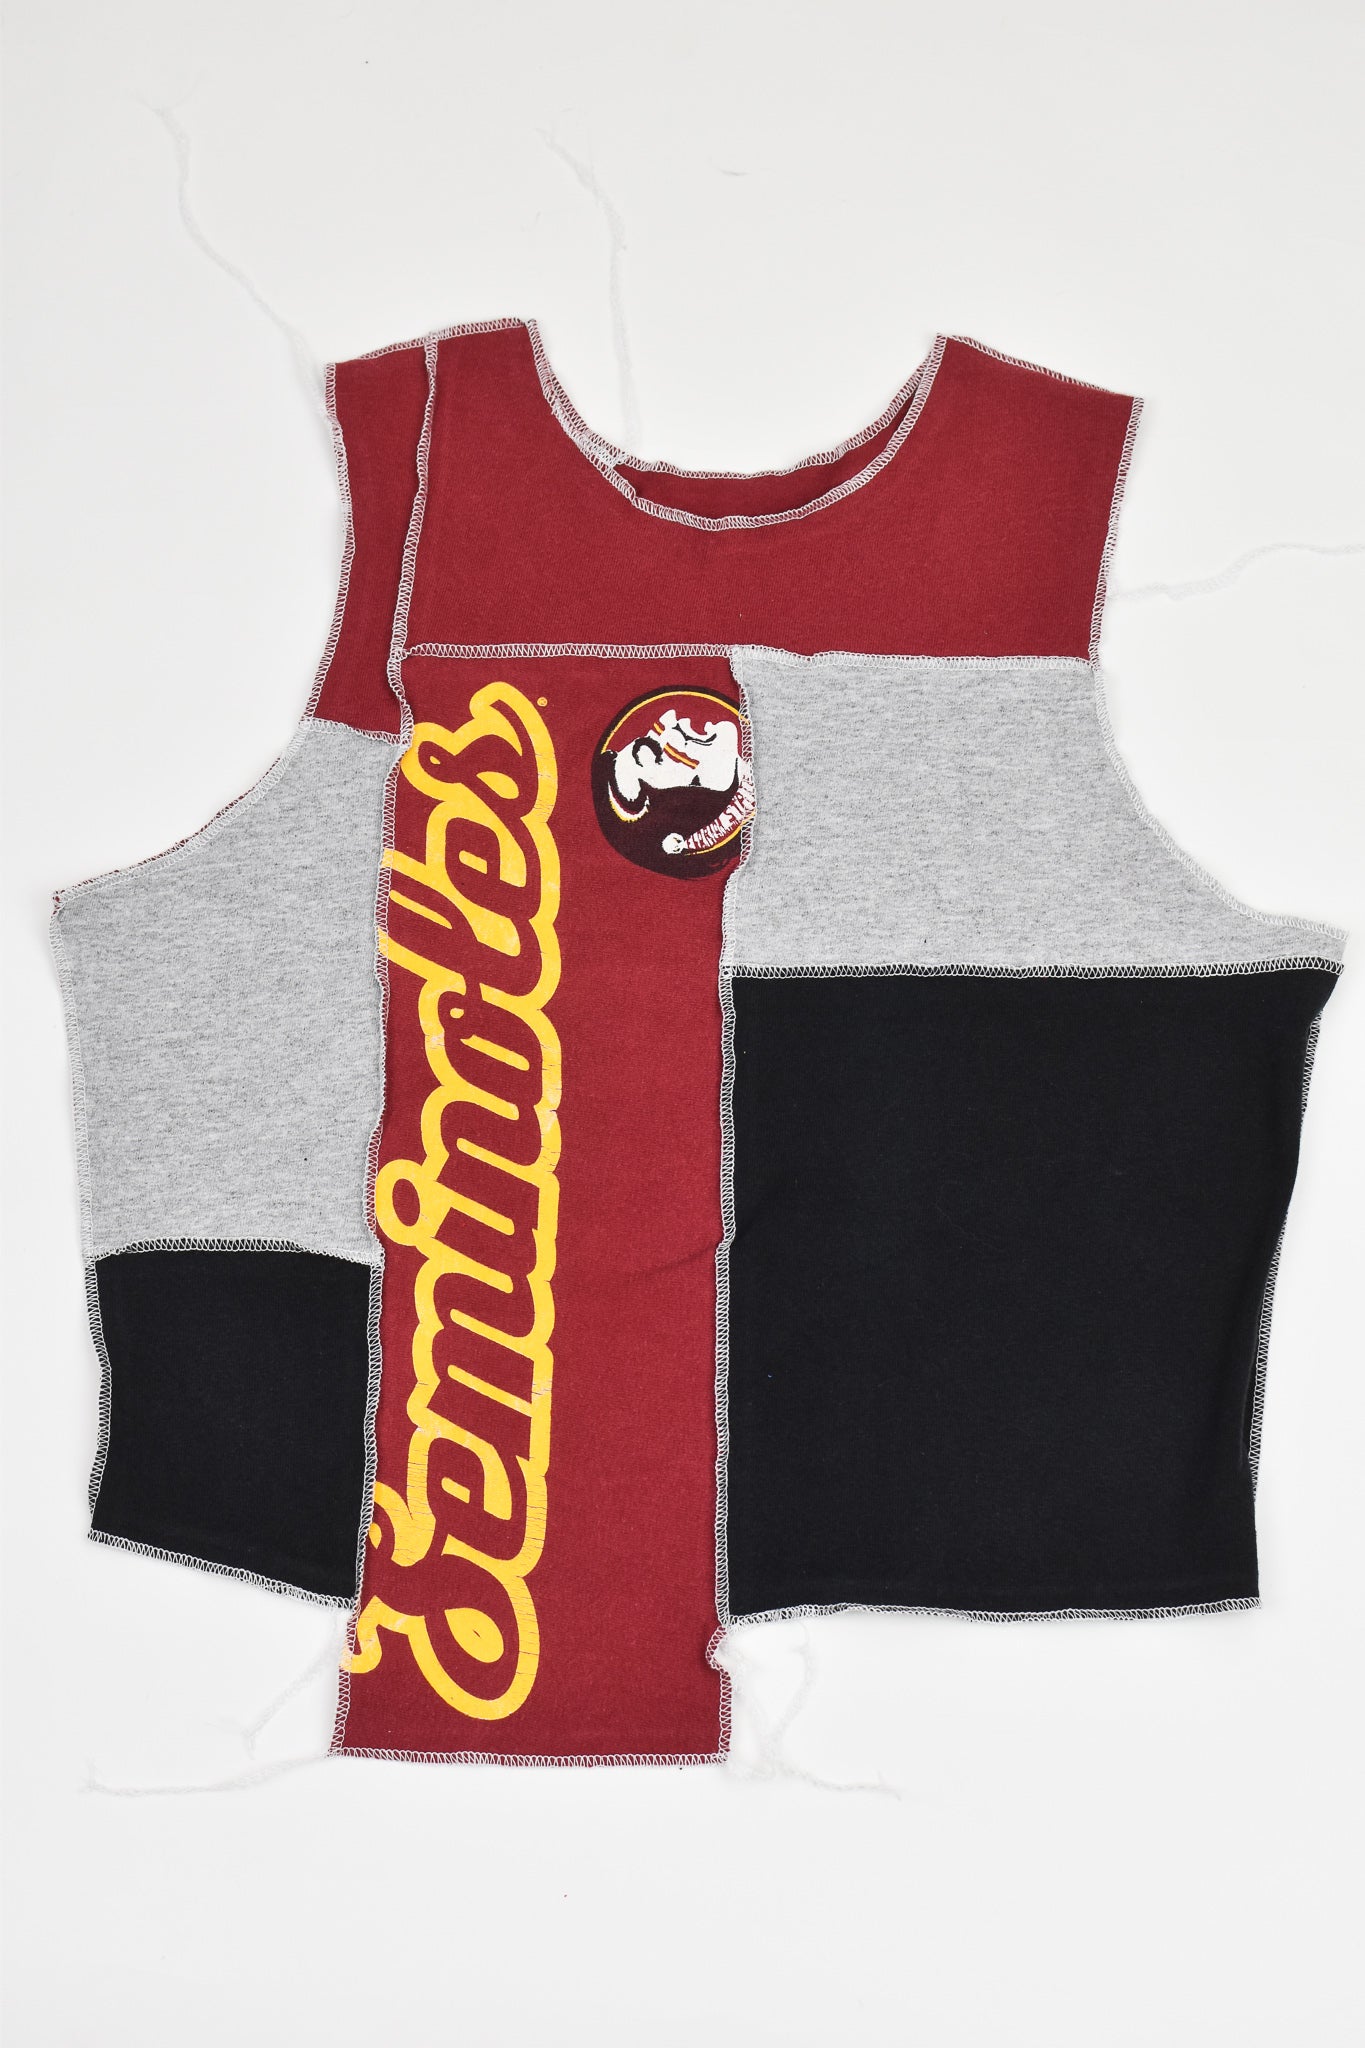 Upcycled Florida State Scrappy Tank Top